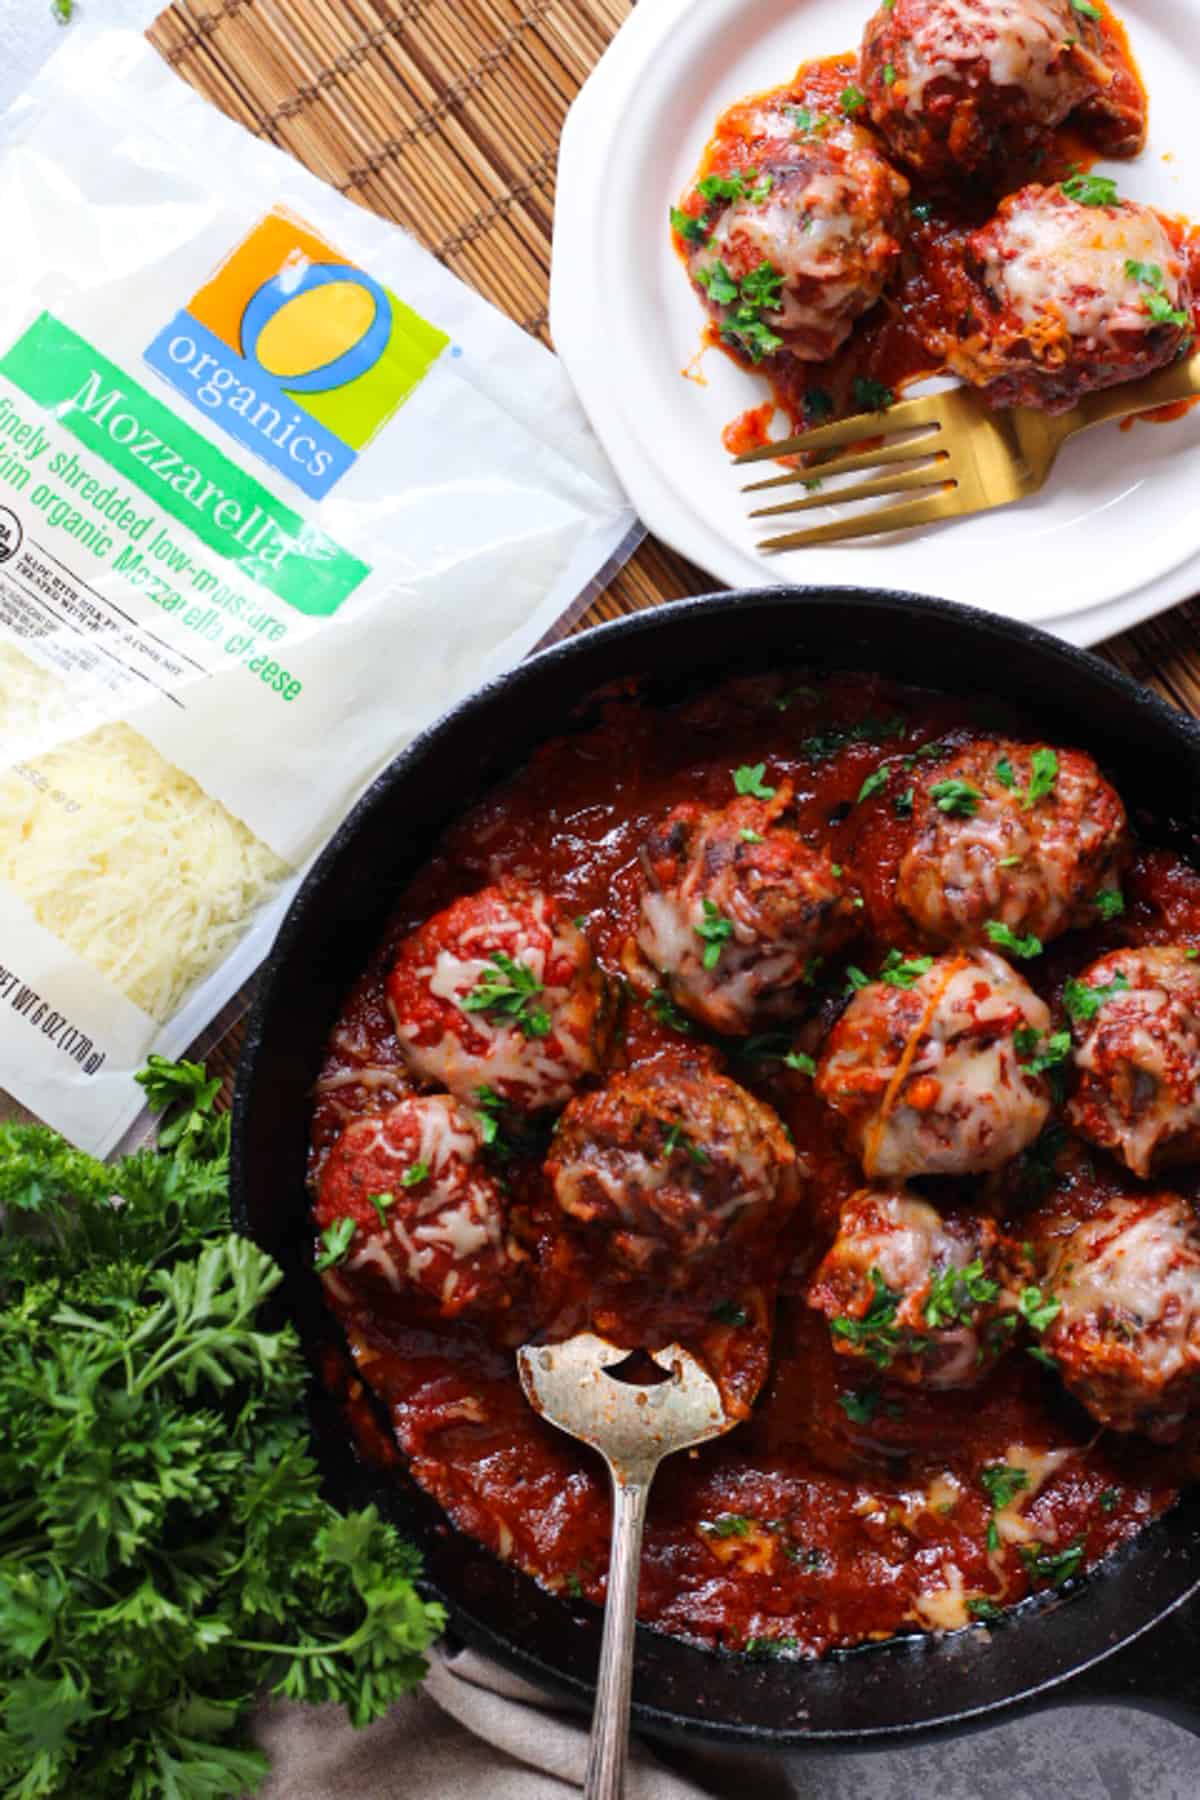 Homemade Italian meatballs are perfect for dinner. These are made with ground beef and are so juicy and tender. Cooked in tomato sauce and topped with mozzarella, you can enjoy these meatballs in a sub, with salad, potatoes or pasta! So easy and simple to make and they're perfect for meal prep. 